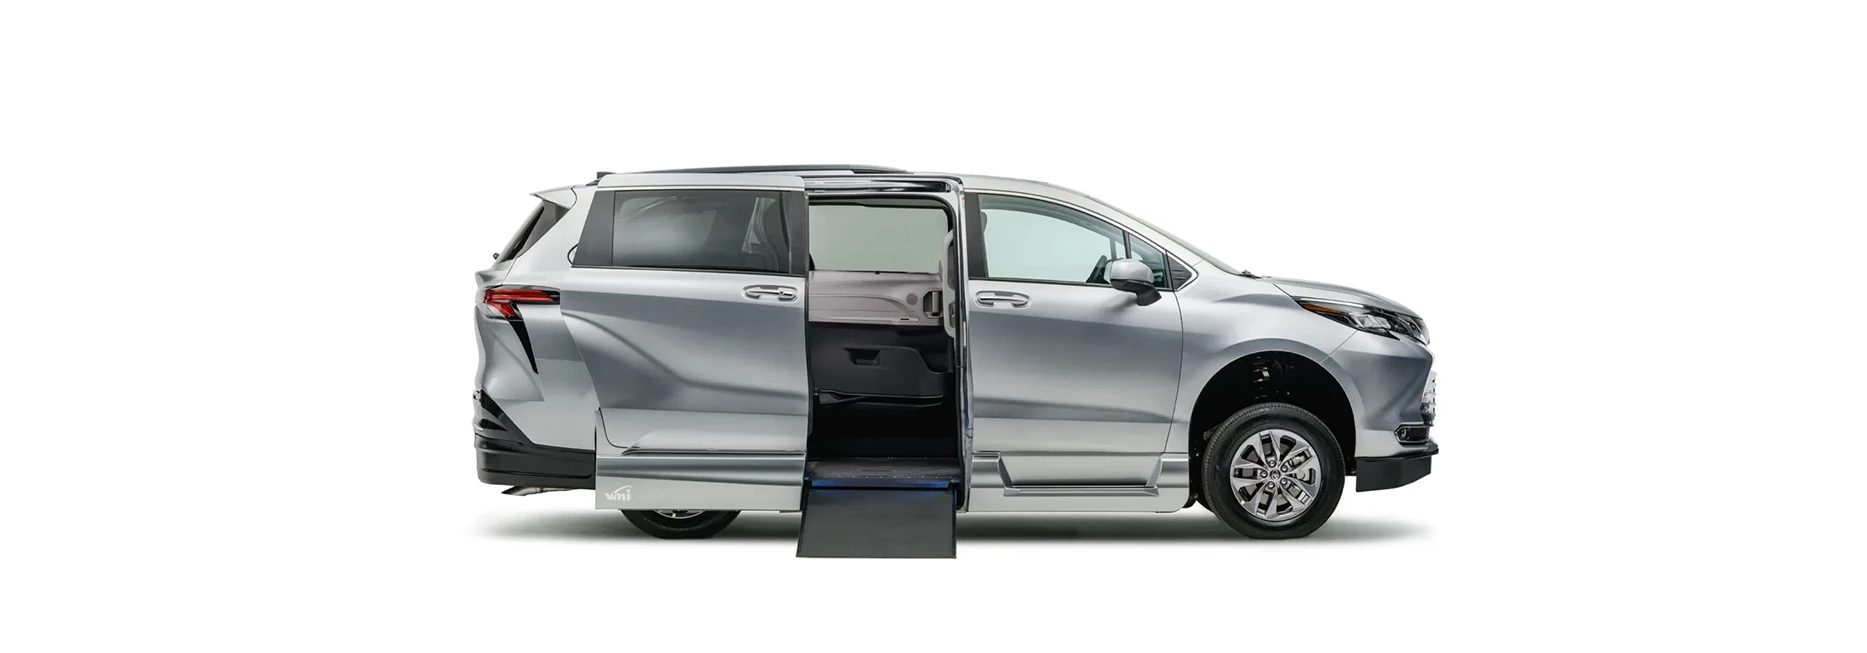 News Landing Image Toyota Sienna for new mobility possibilities